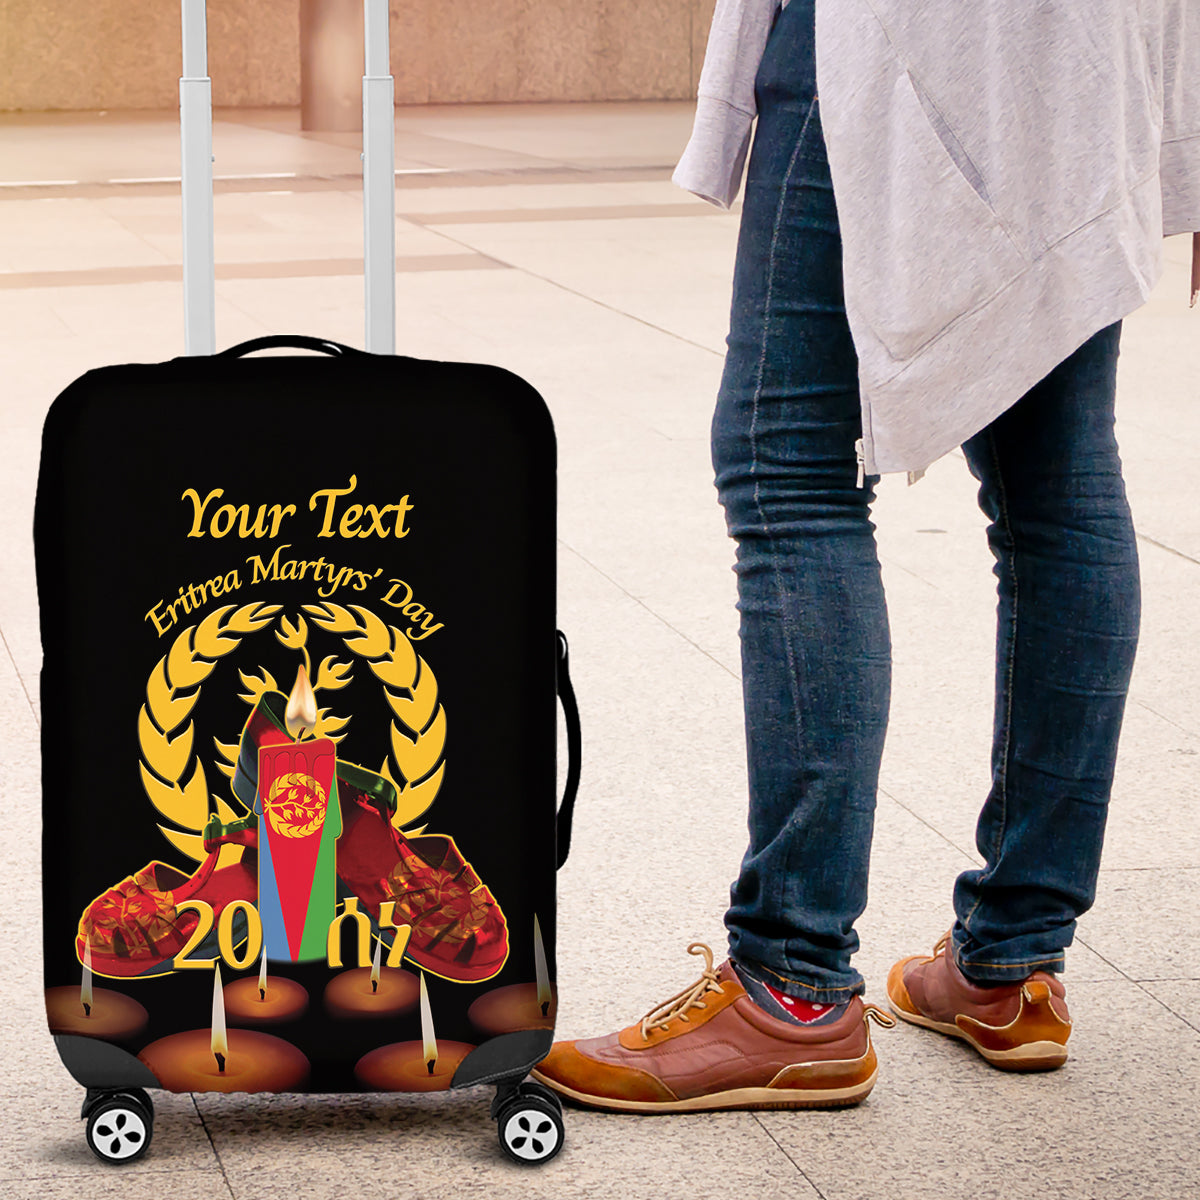 Custom Eritrea Martyrs' Day Luggage Cover 20 June Shida Shoes With Candles - Black